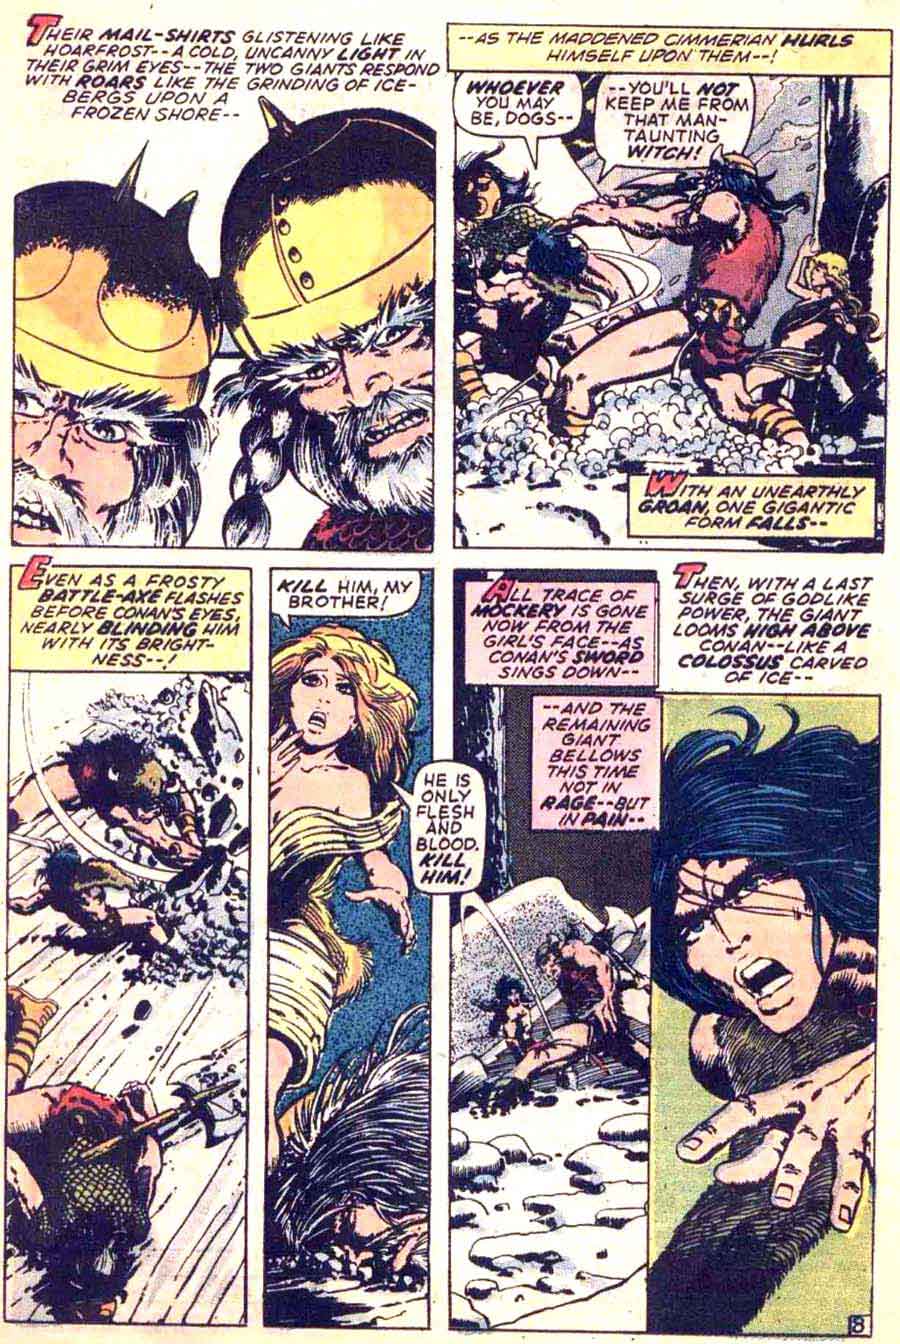 Conan the Barbarian v1 #16 marvel comic book page art by Barry Windsor Smith